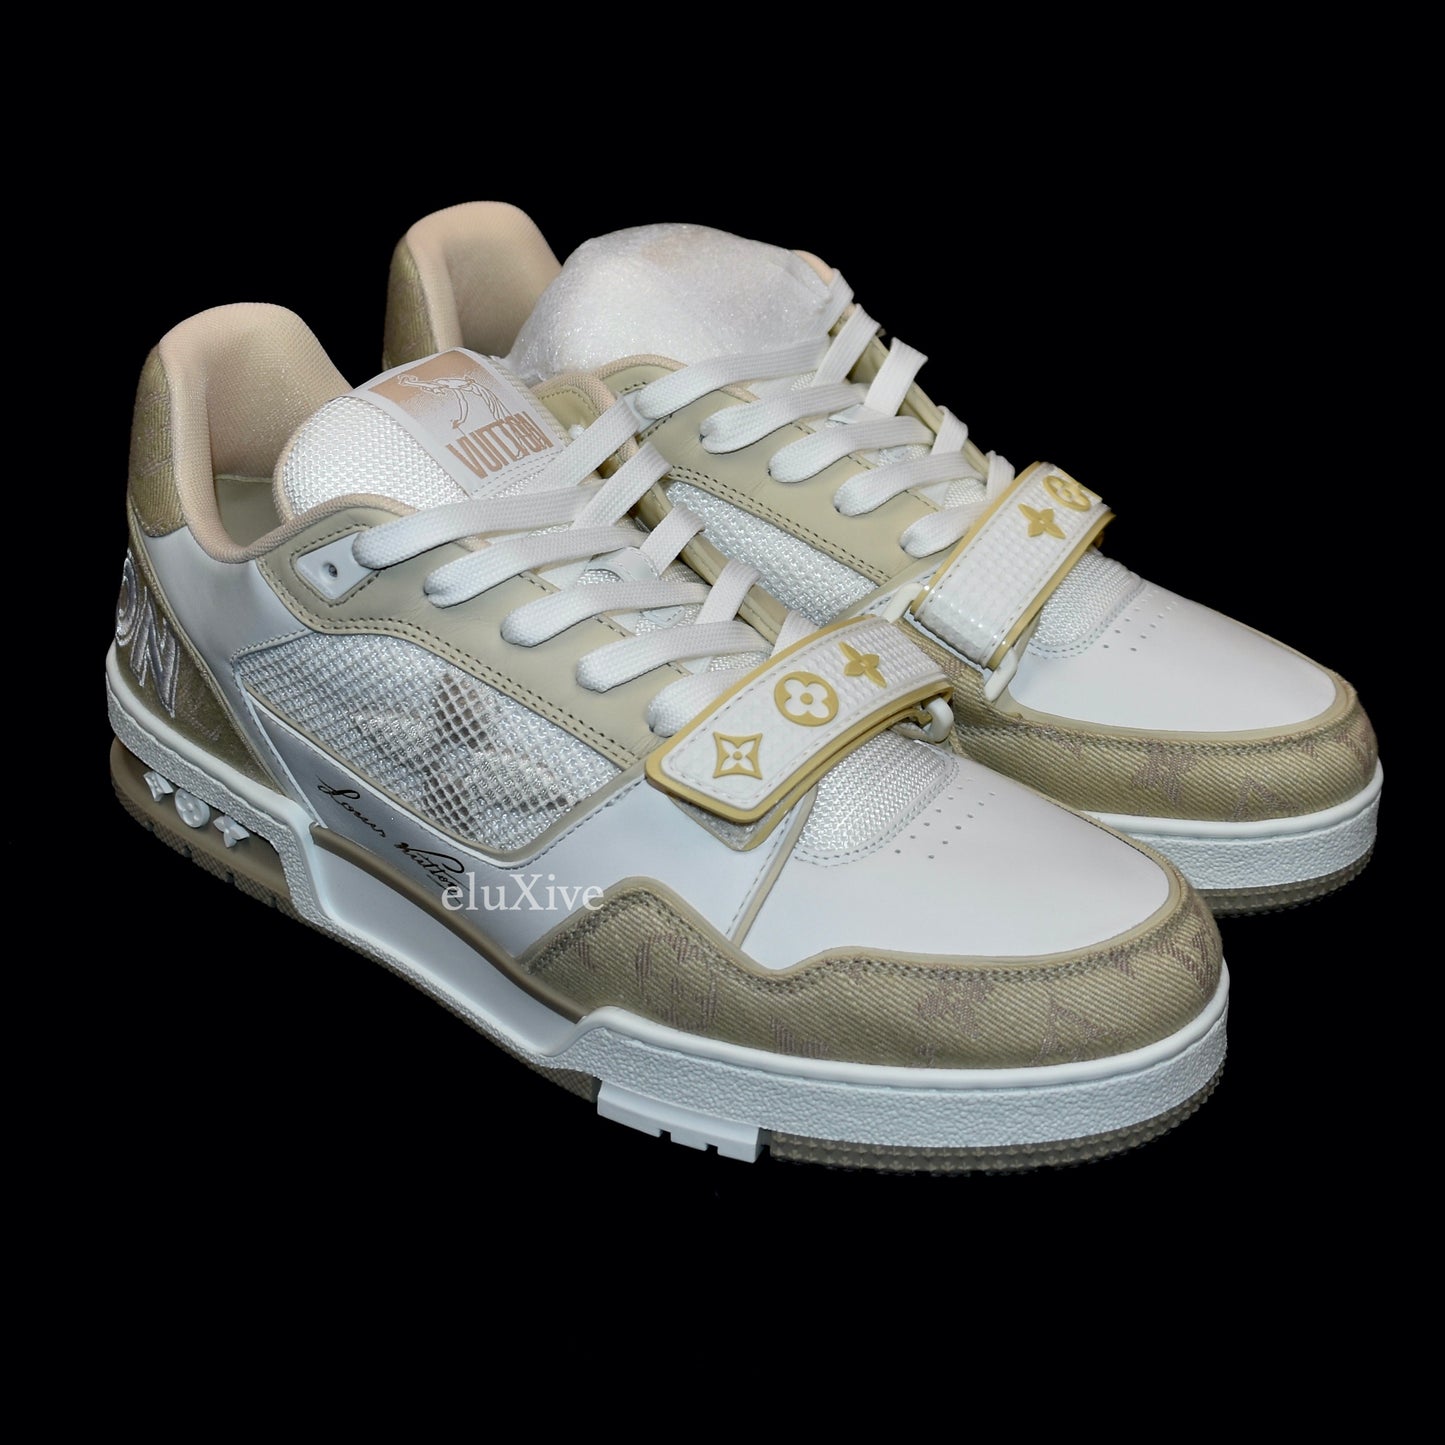 Louis Vuitton - White/Beige Trainer Sneakers with Strap